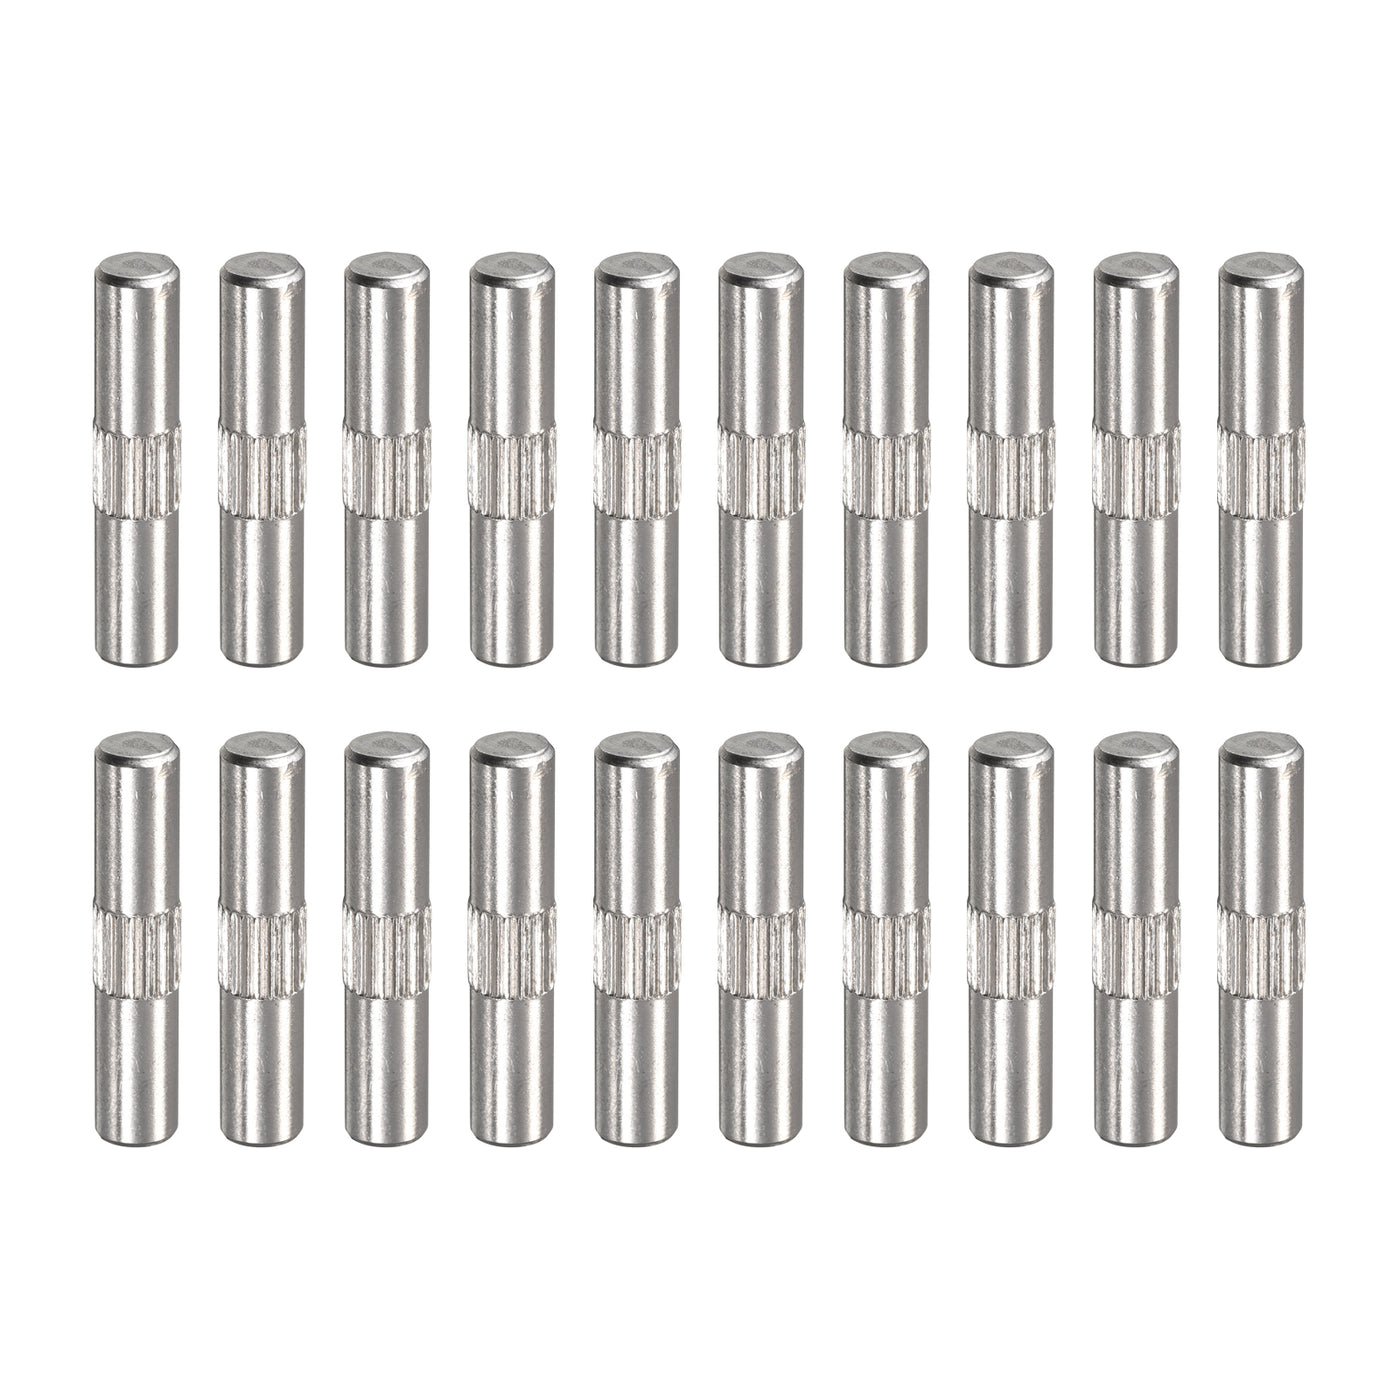 uxcell Uxcell 5x25mm 304 Stainless Steel Dowel Pins, 20Pcs Center Knurled Chamfered End Pin